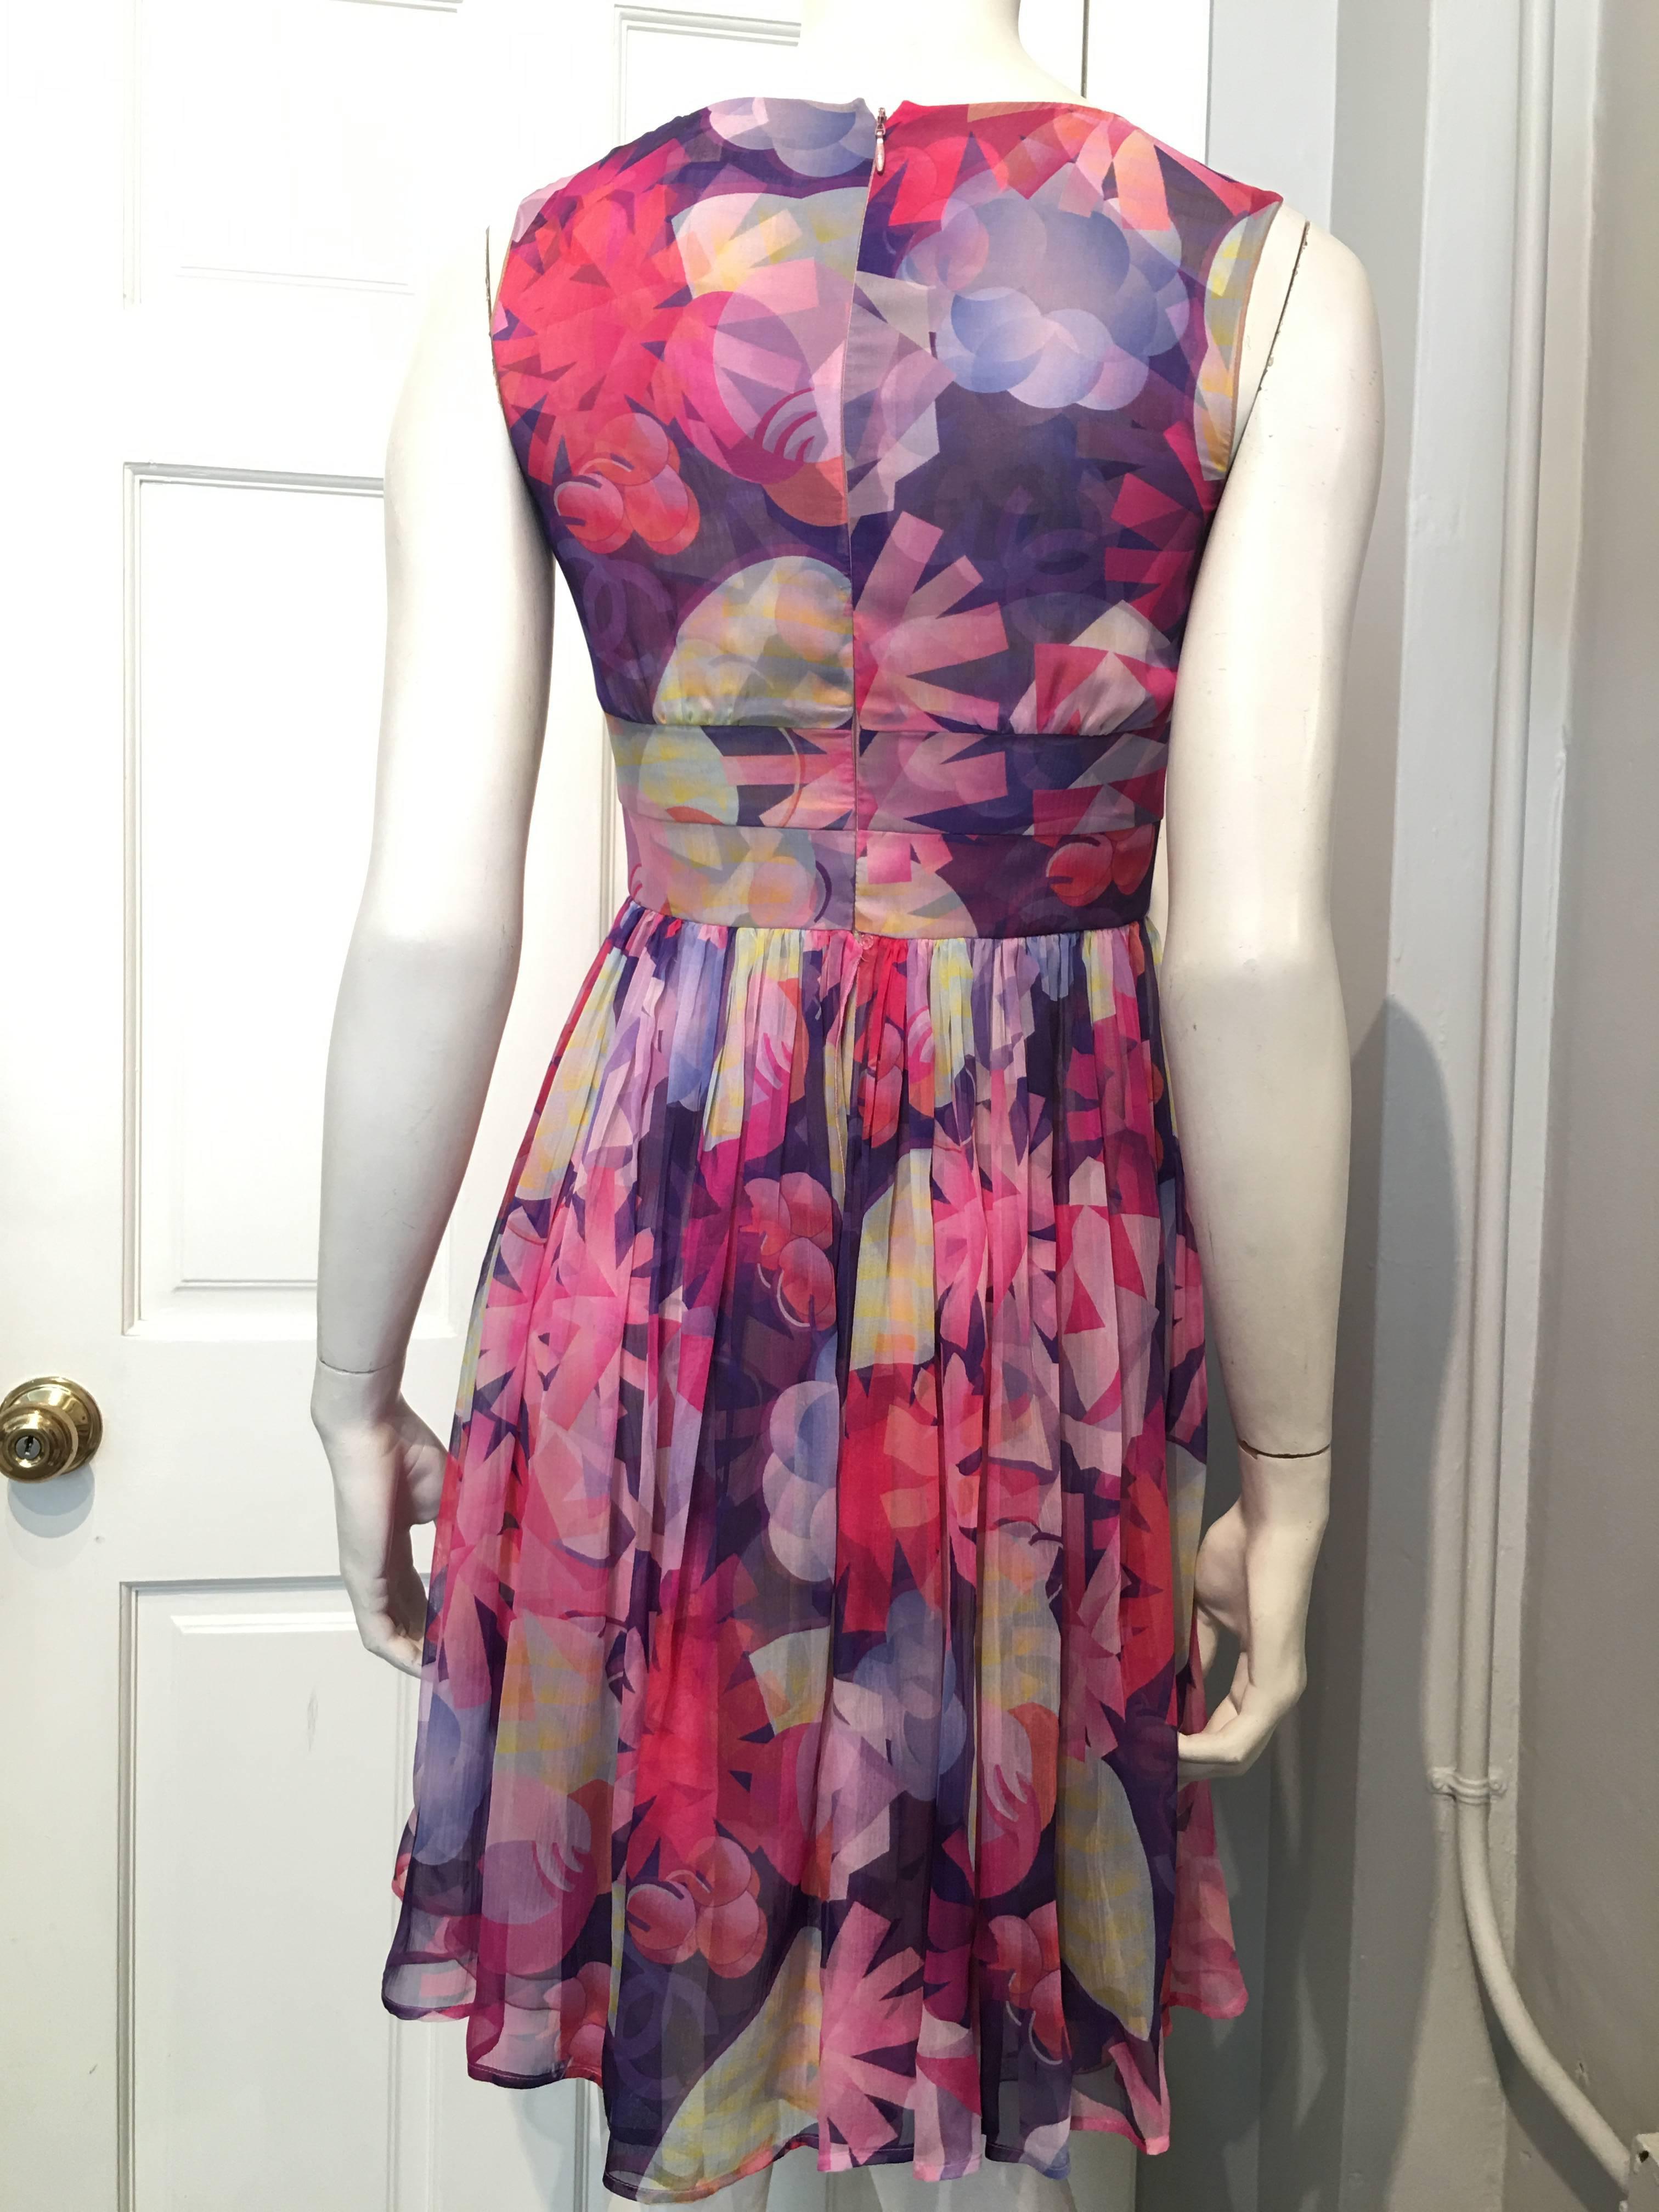 Chanel Multi-Color Silk Dress size 34 (2) In Excellent Condition For Sale In San Francisco, CA